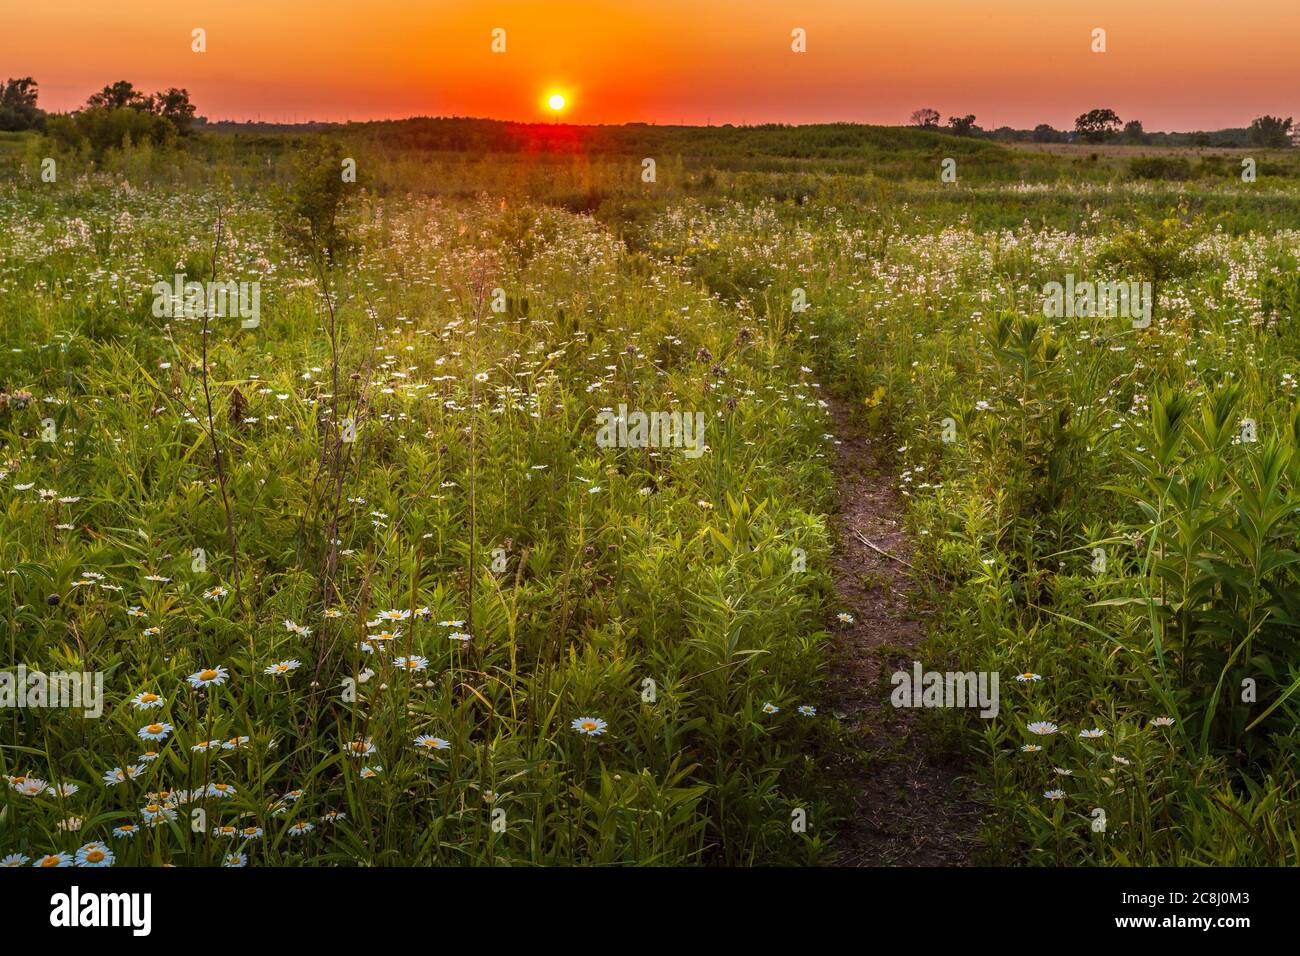 Sunset over a field of wildflowers Stock Photo